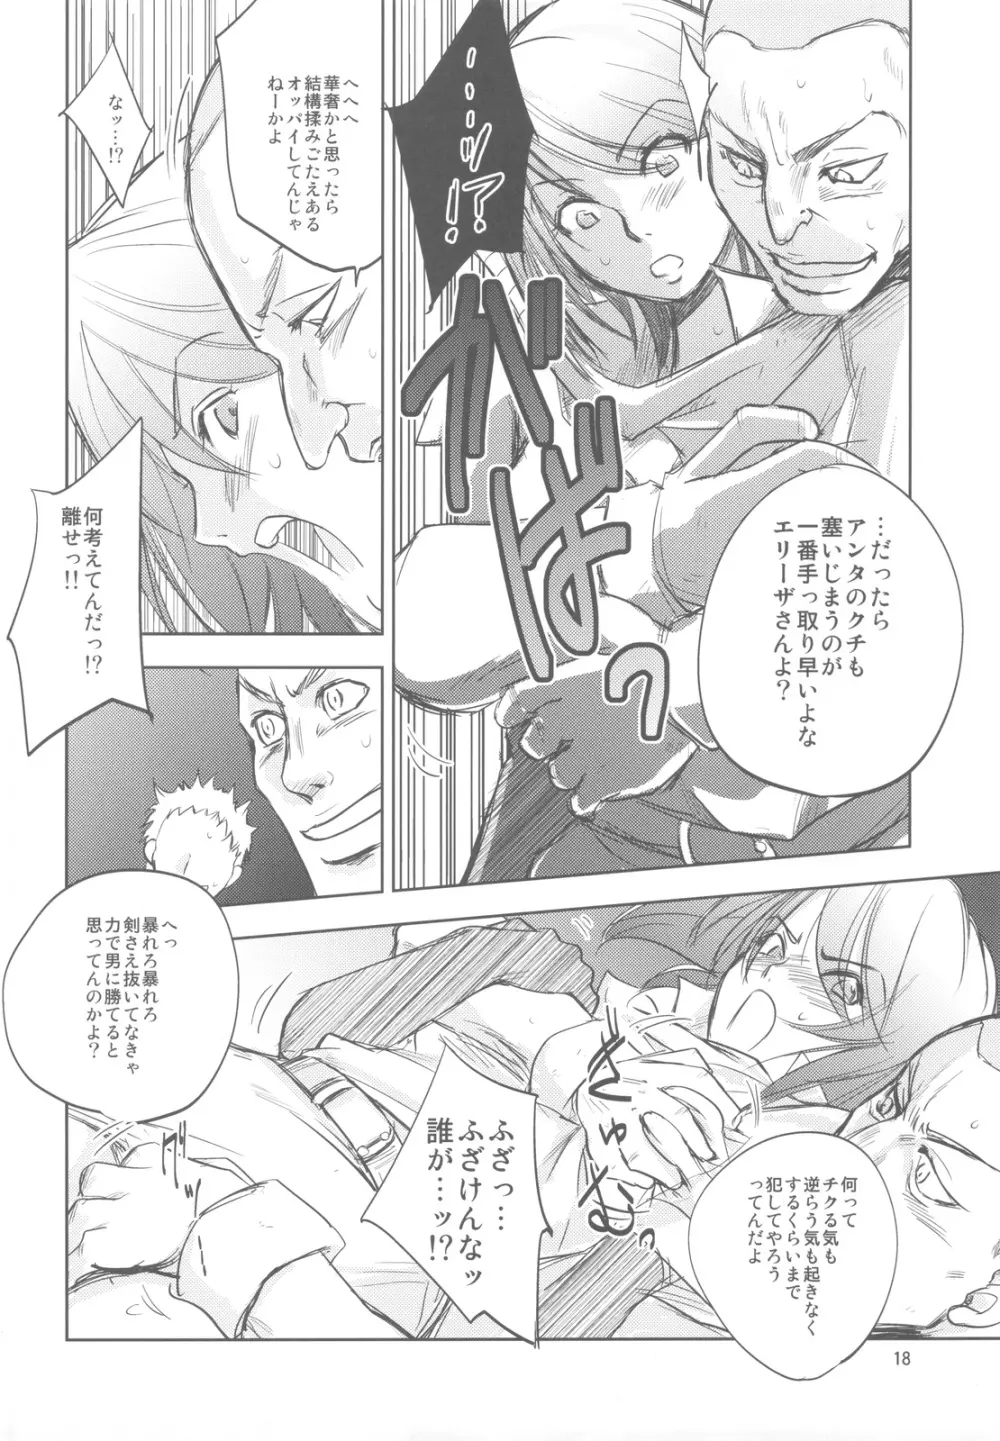 GRASSEN'S WAR ANOTHER STORY Ex #01 ノード侵攻 I - page17